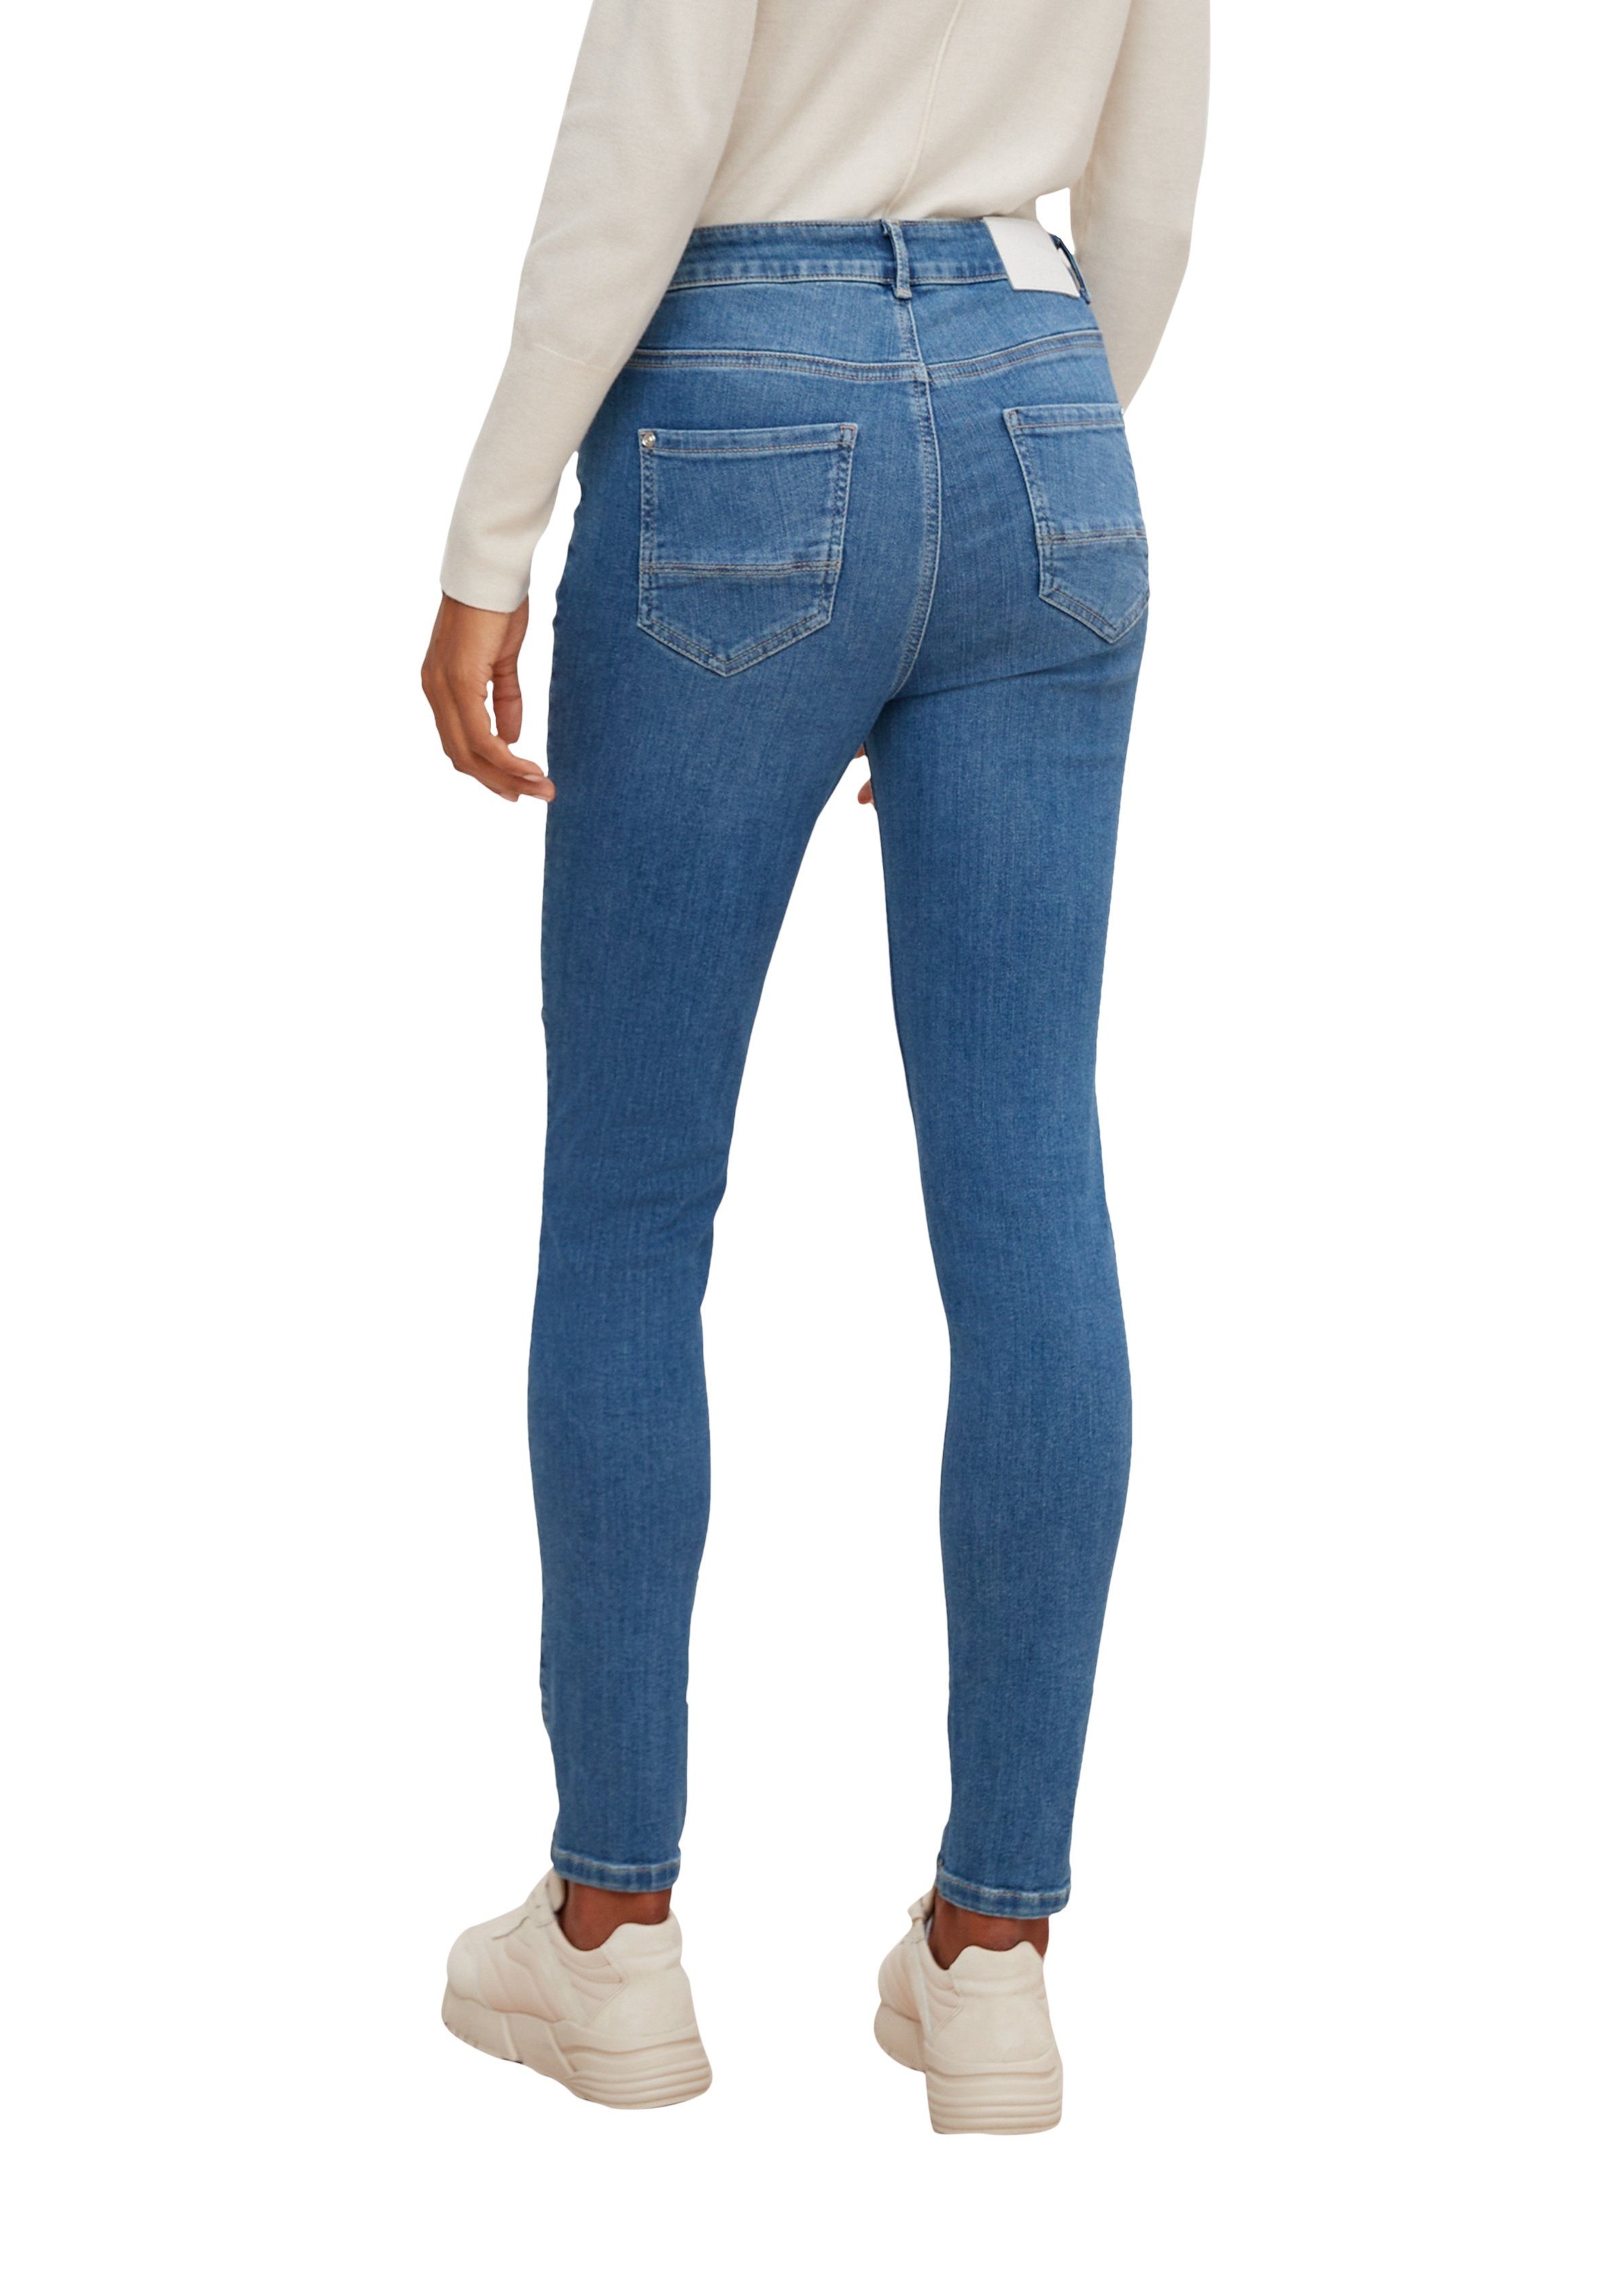 Jeanshose comma identity Skinny-fit-Jeans casual